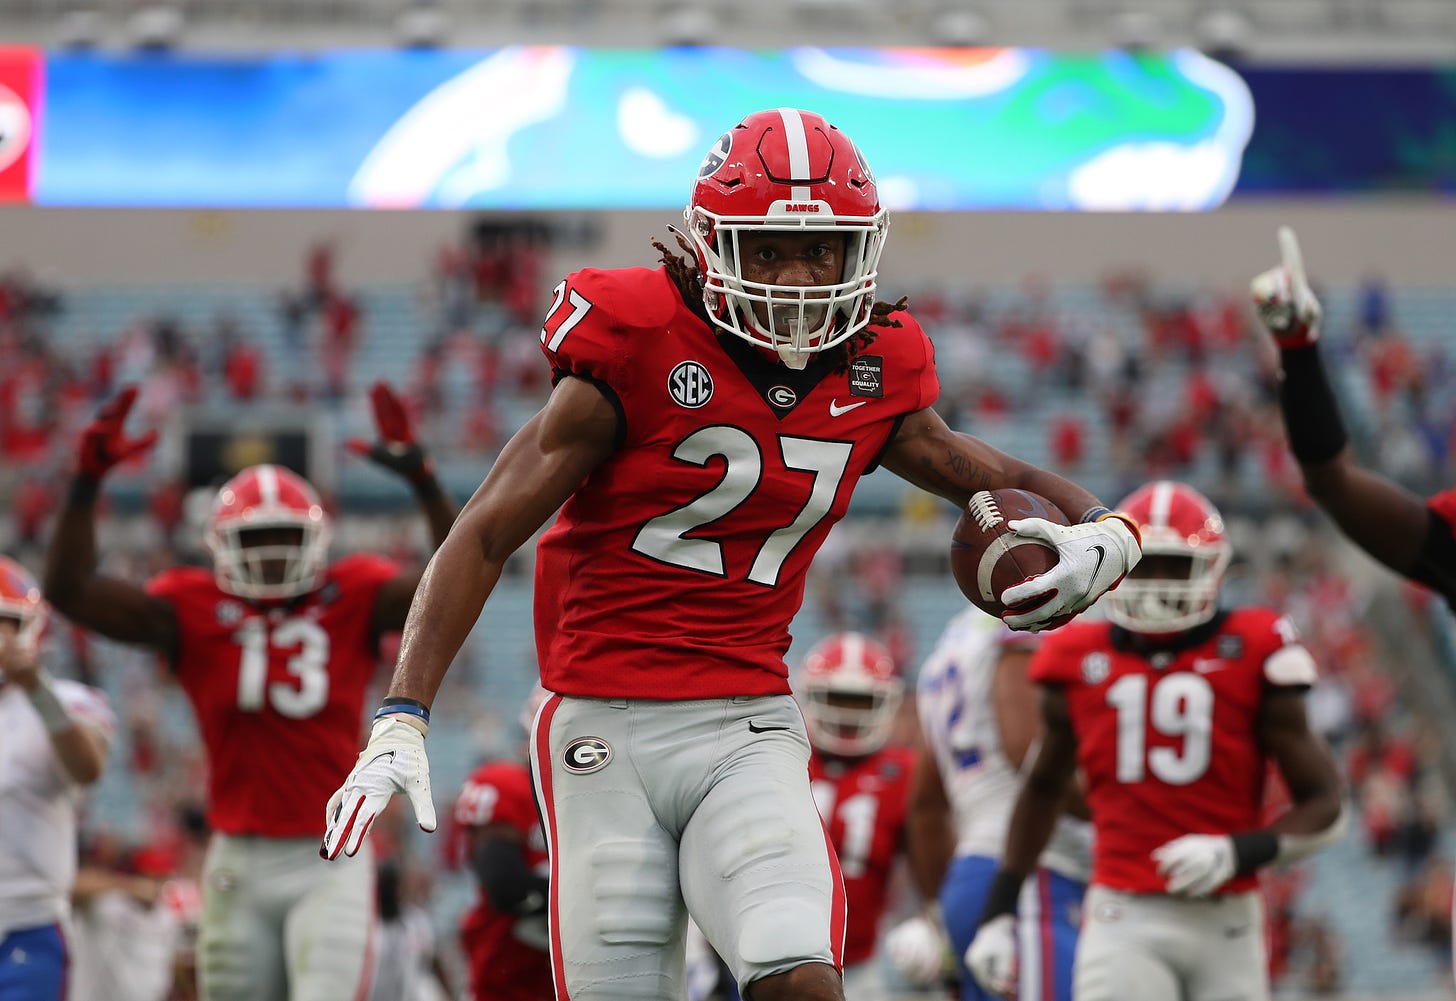 Georgia defensive back Eric Stokes (27) during the Bulldogs' game with Florida in Jacksonville, Fla., on Saturday, Nov. 7, 2020. (Photo by Piper Hansen)